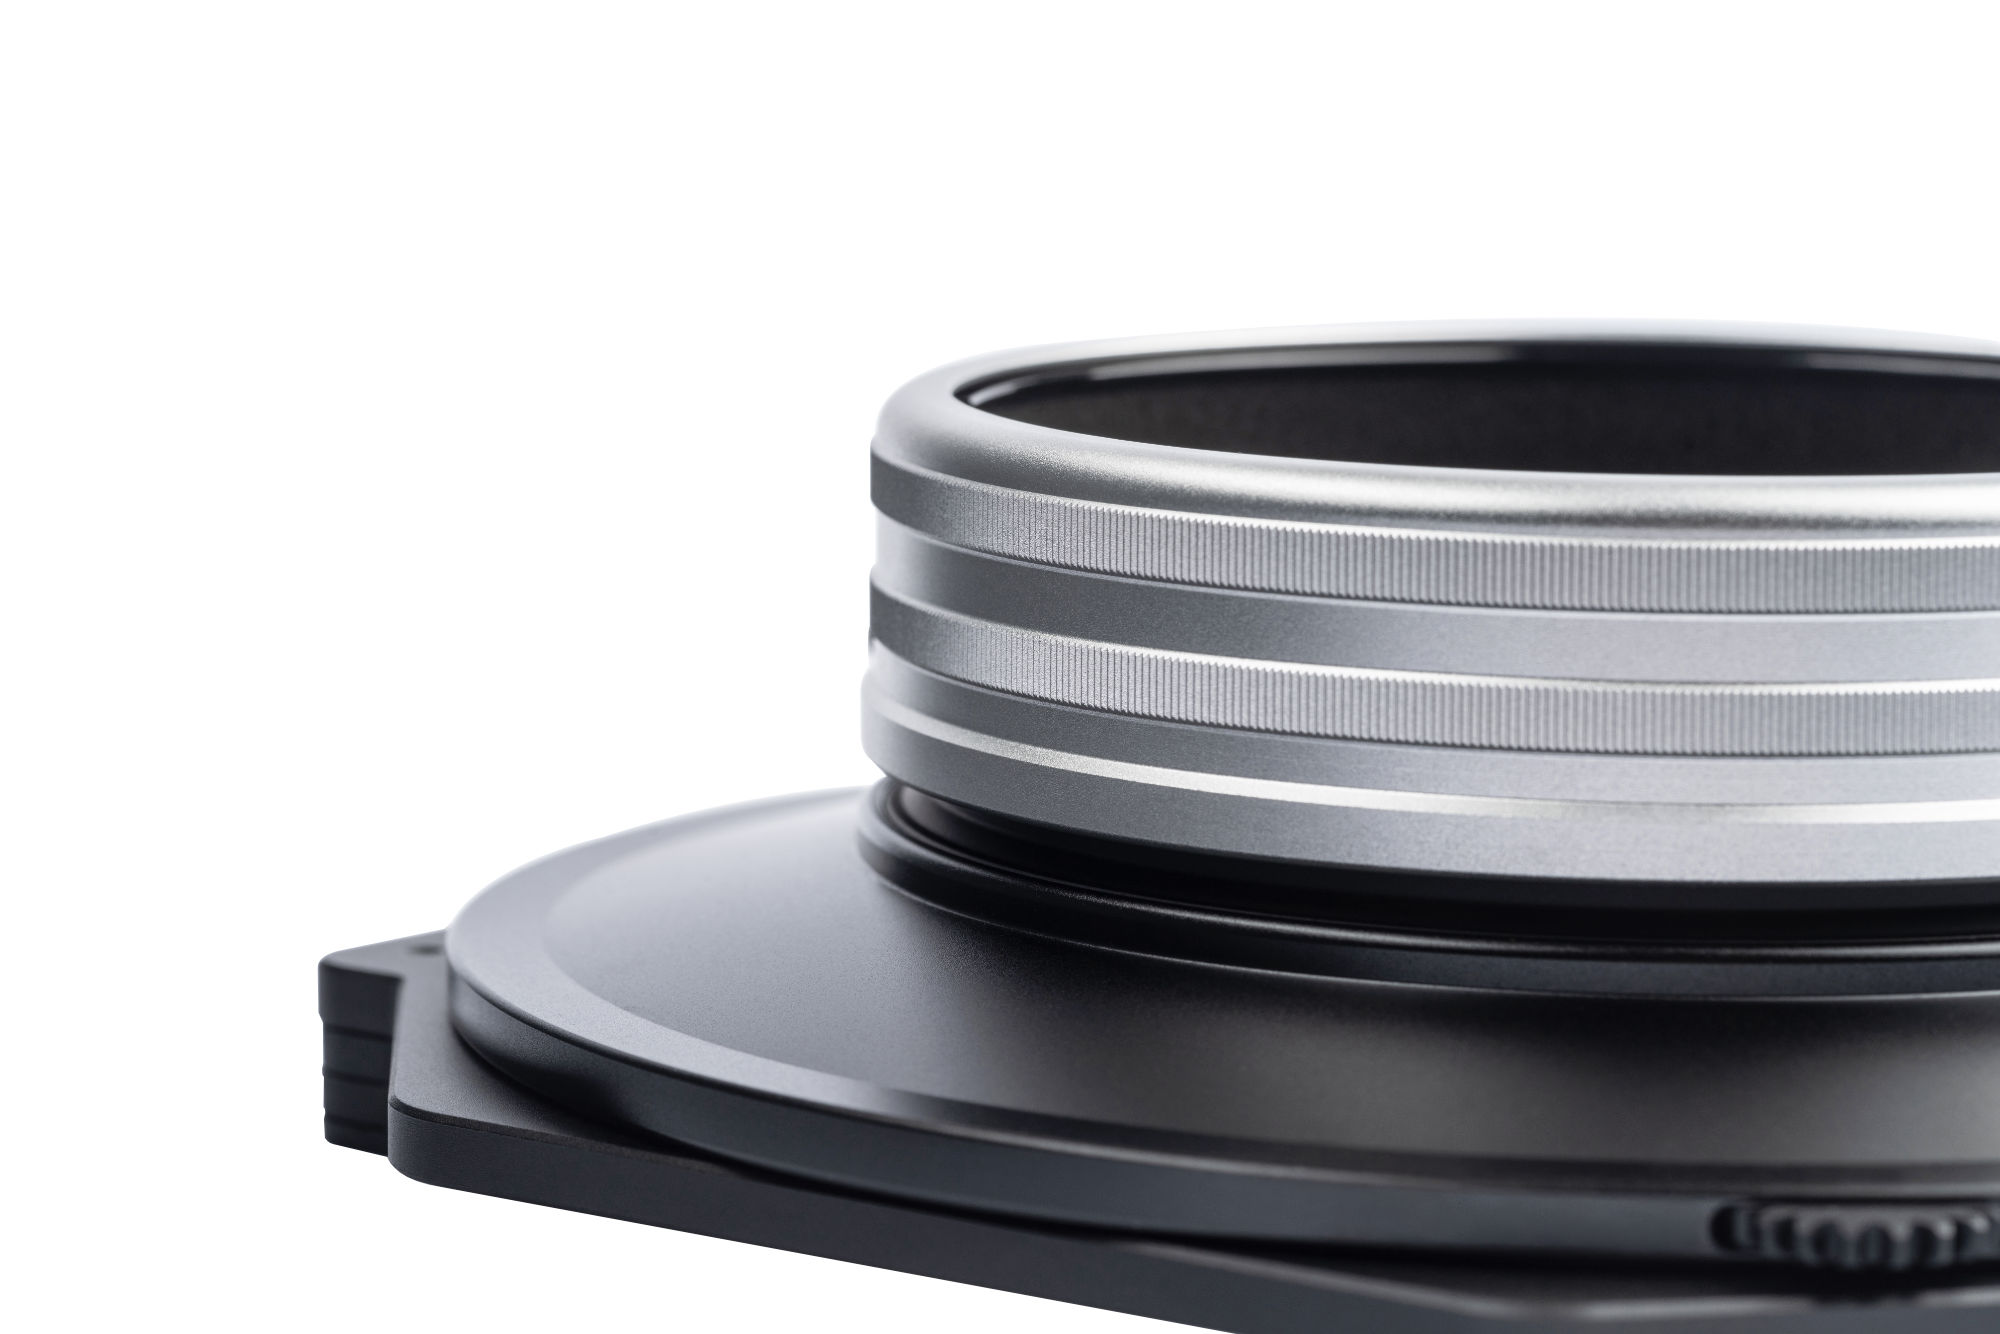 Black NIP-FH150-S5-EN-SO1224 NiSi 150mm Filter Holder for Sony 12-24mm F/4 Lens with Landscape CPL S5 for Ultra Wide Lenses from Ikan